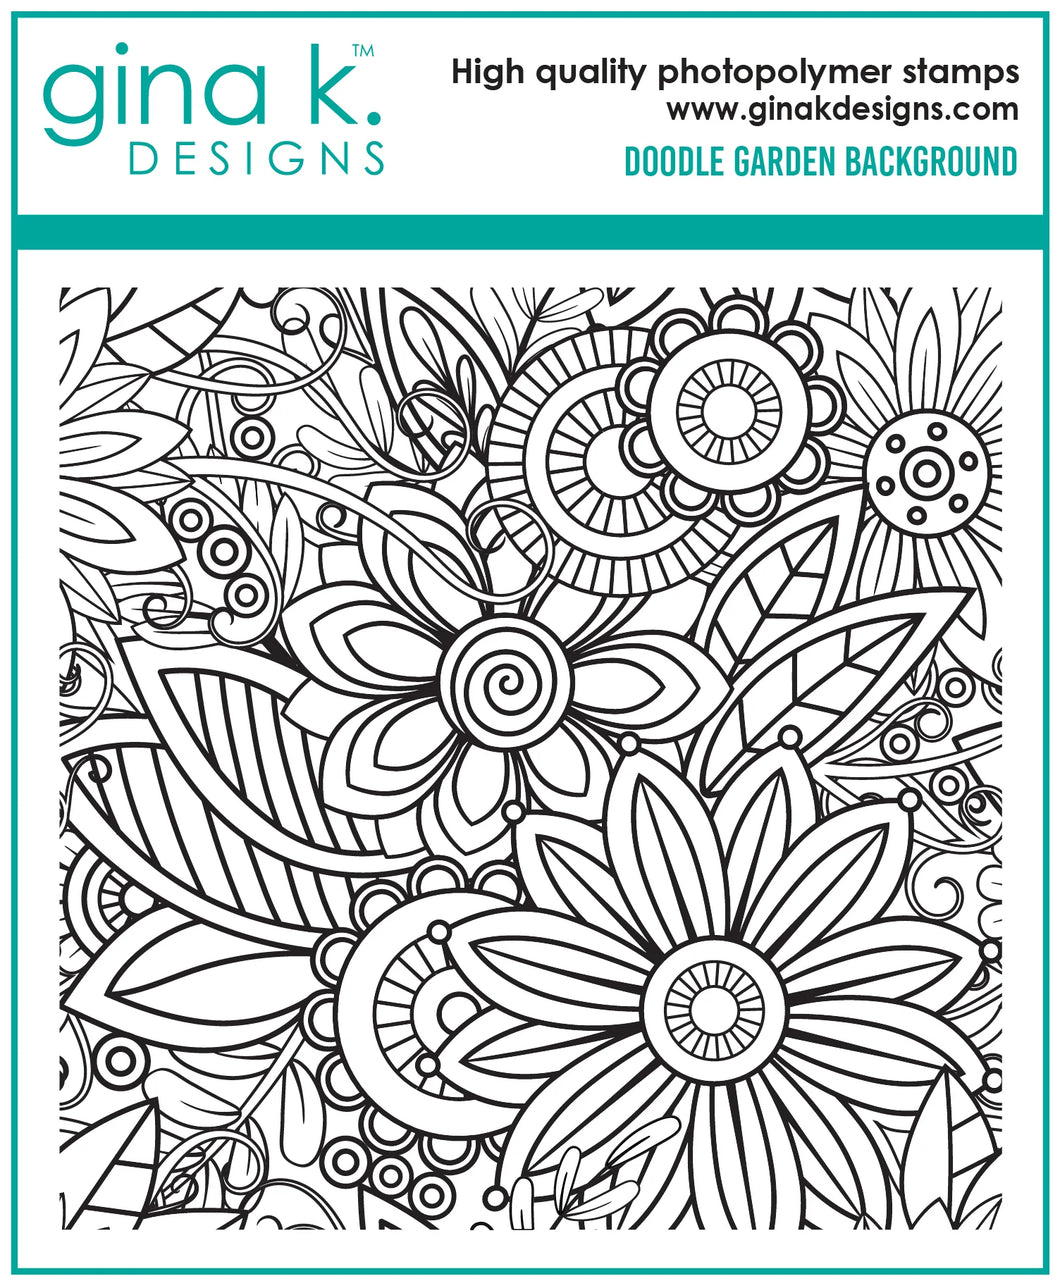 Gina K. Designs - Background Stamp - Doodle Garden. Doodle Garden is a stamp set by Gina K Designs. This set is made of premium clear photopolymer and measures 6